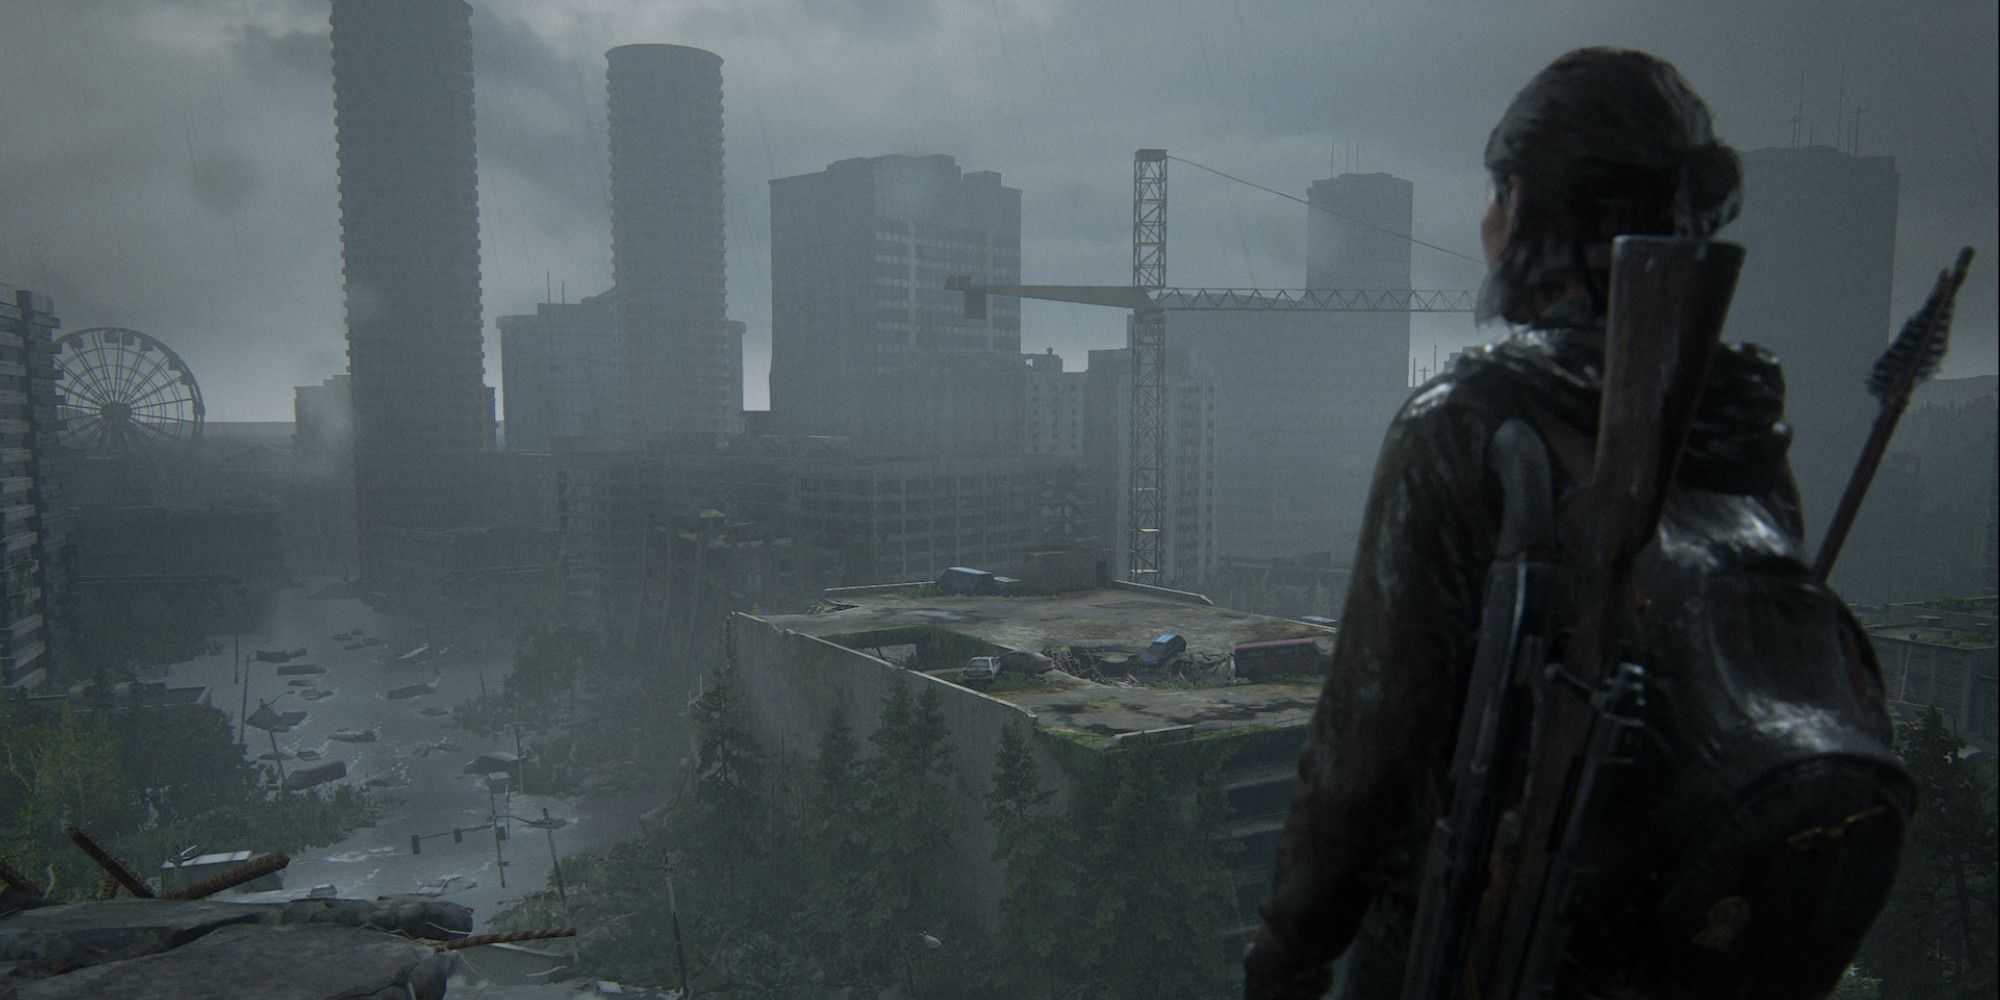 Ellie looks out over a ruined city